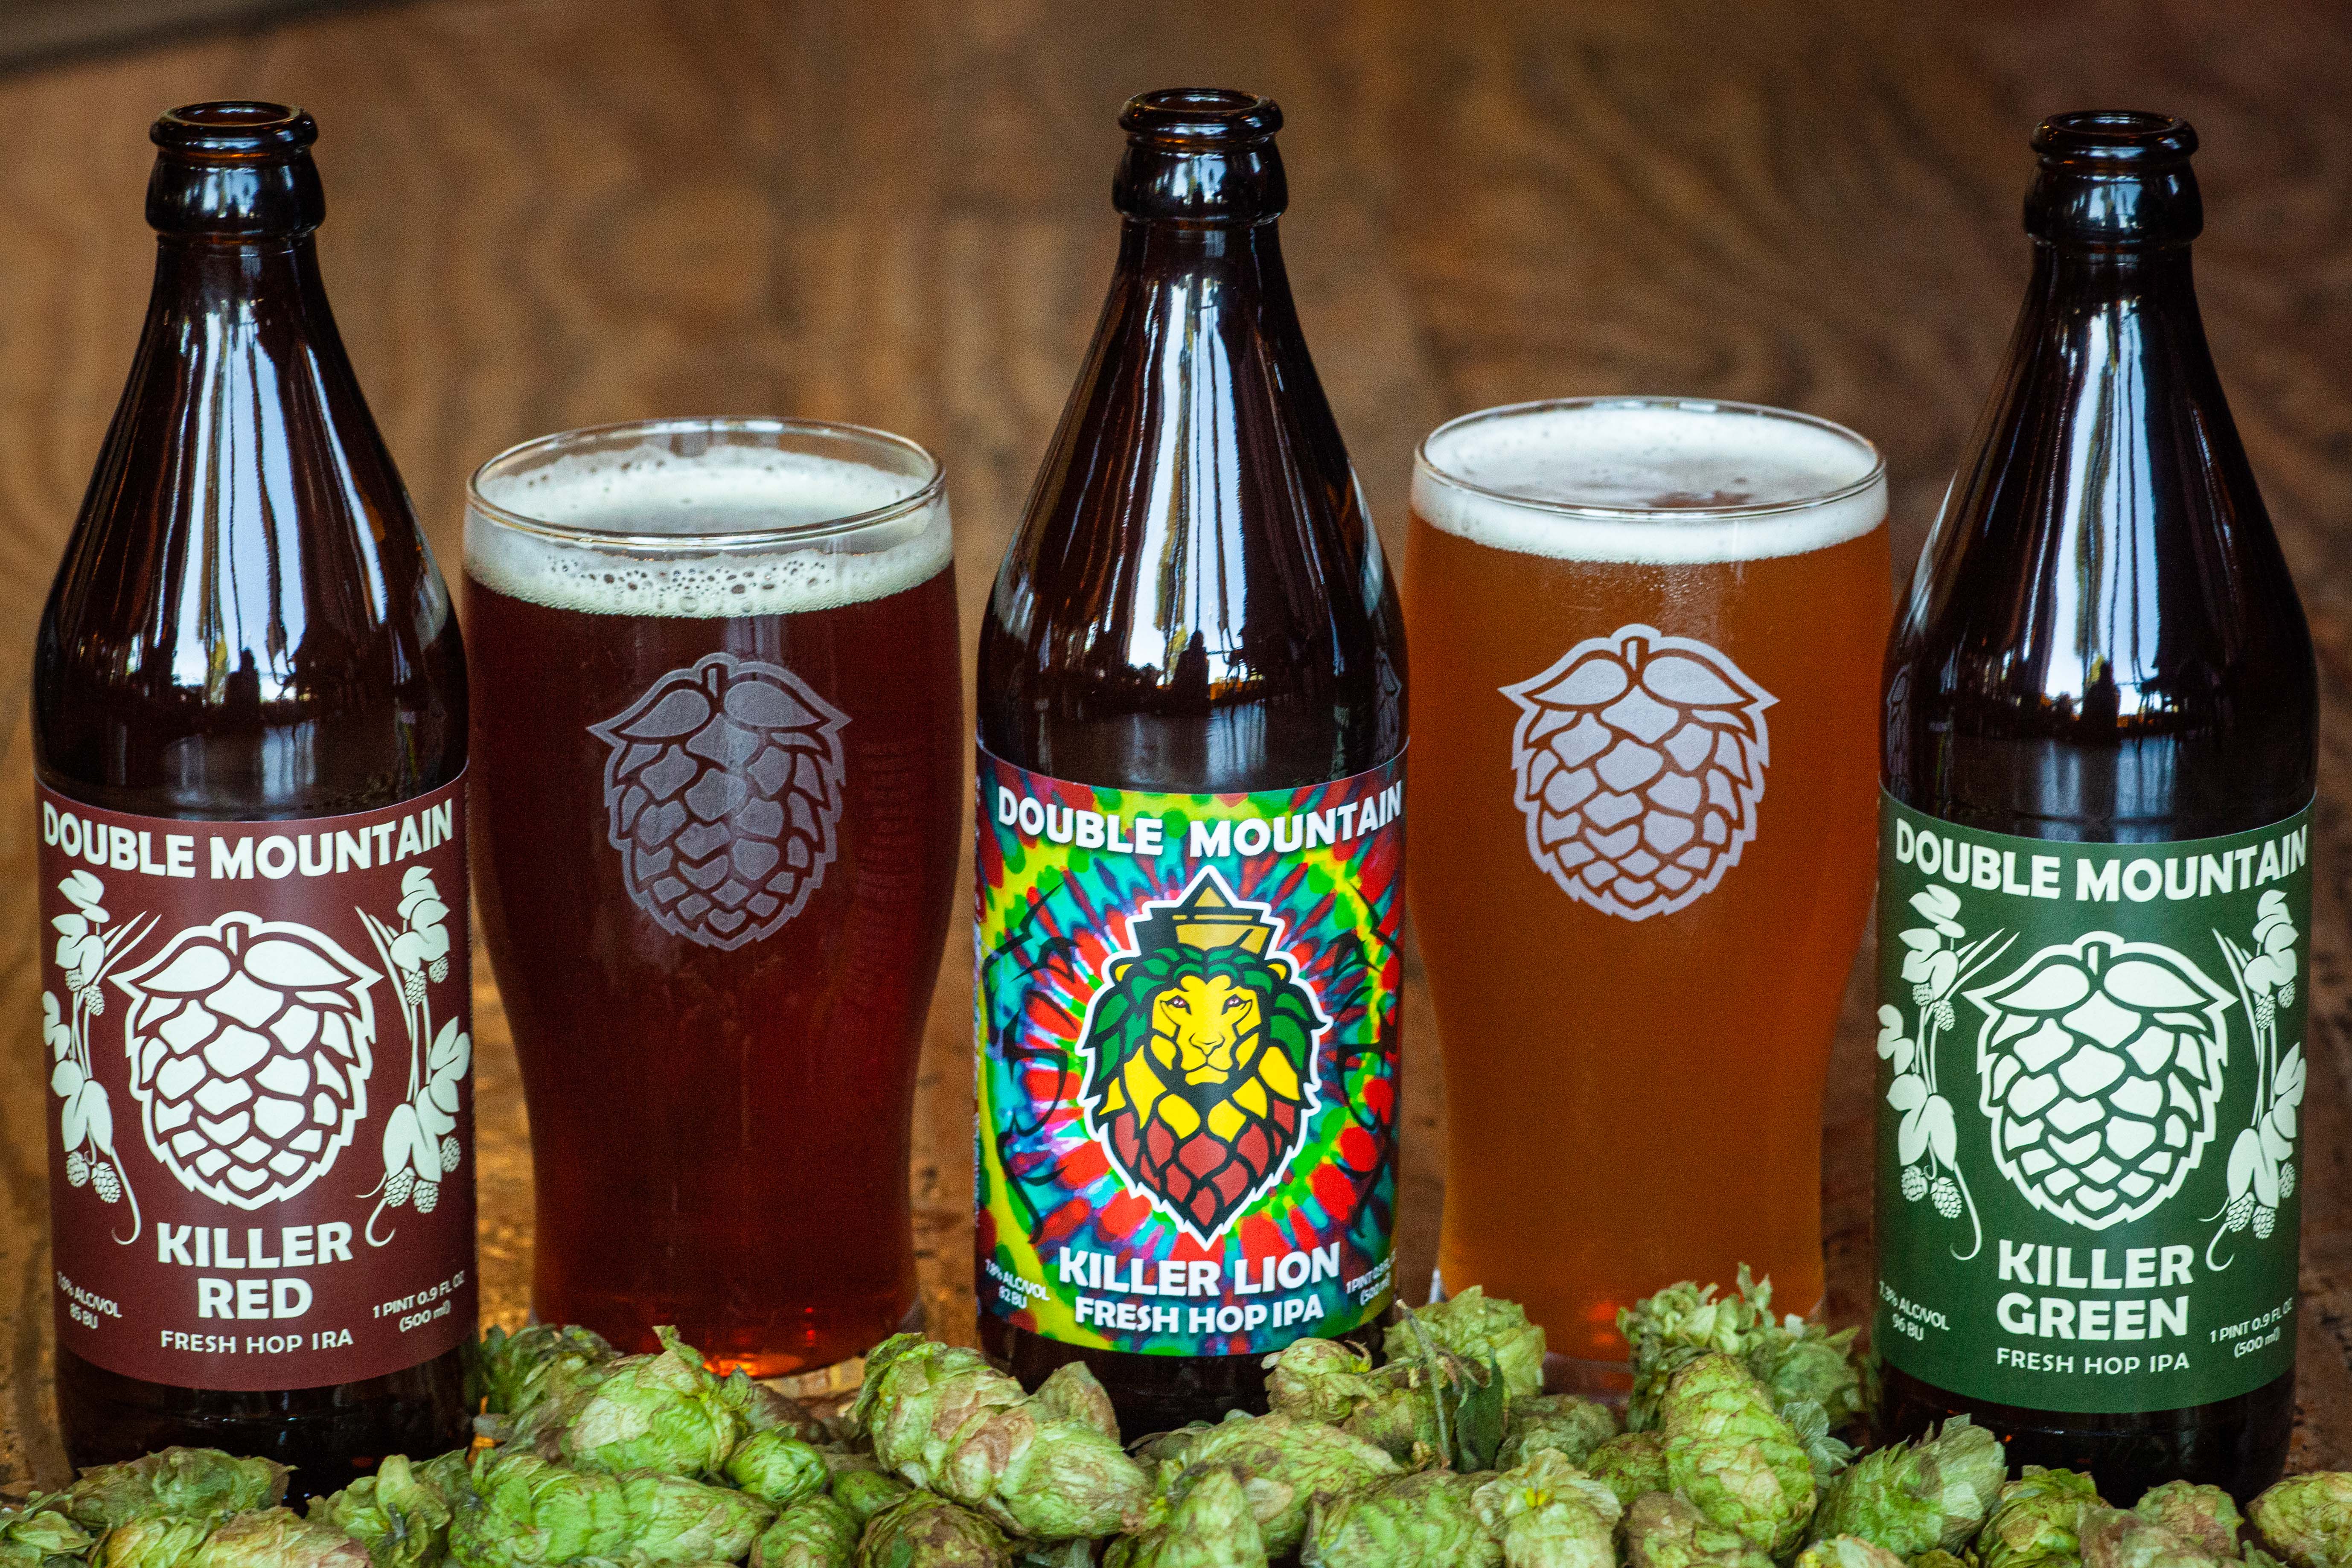 image of fresh hop beers courtesy of Double Mountain Brewery